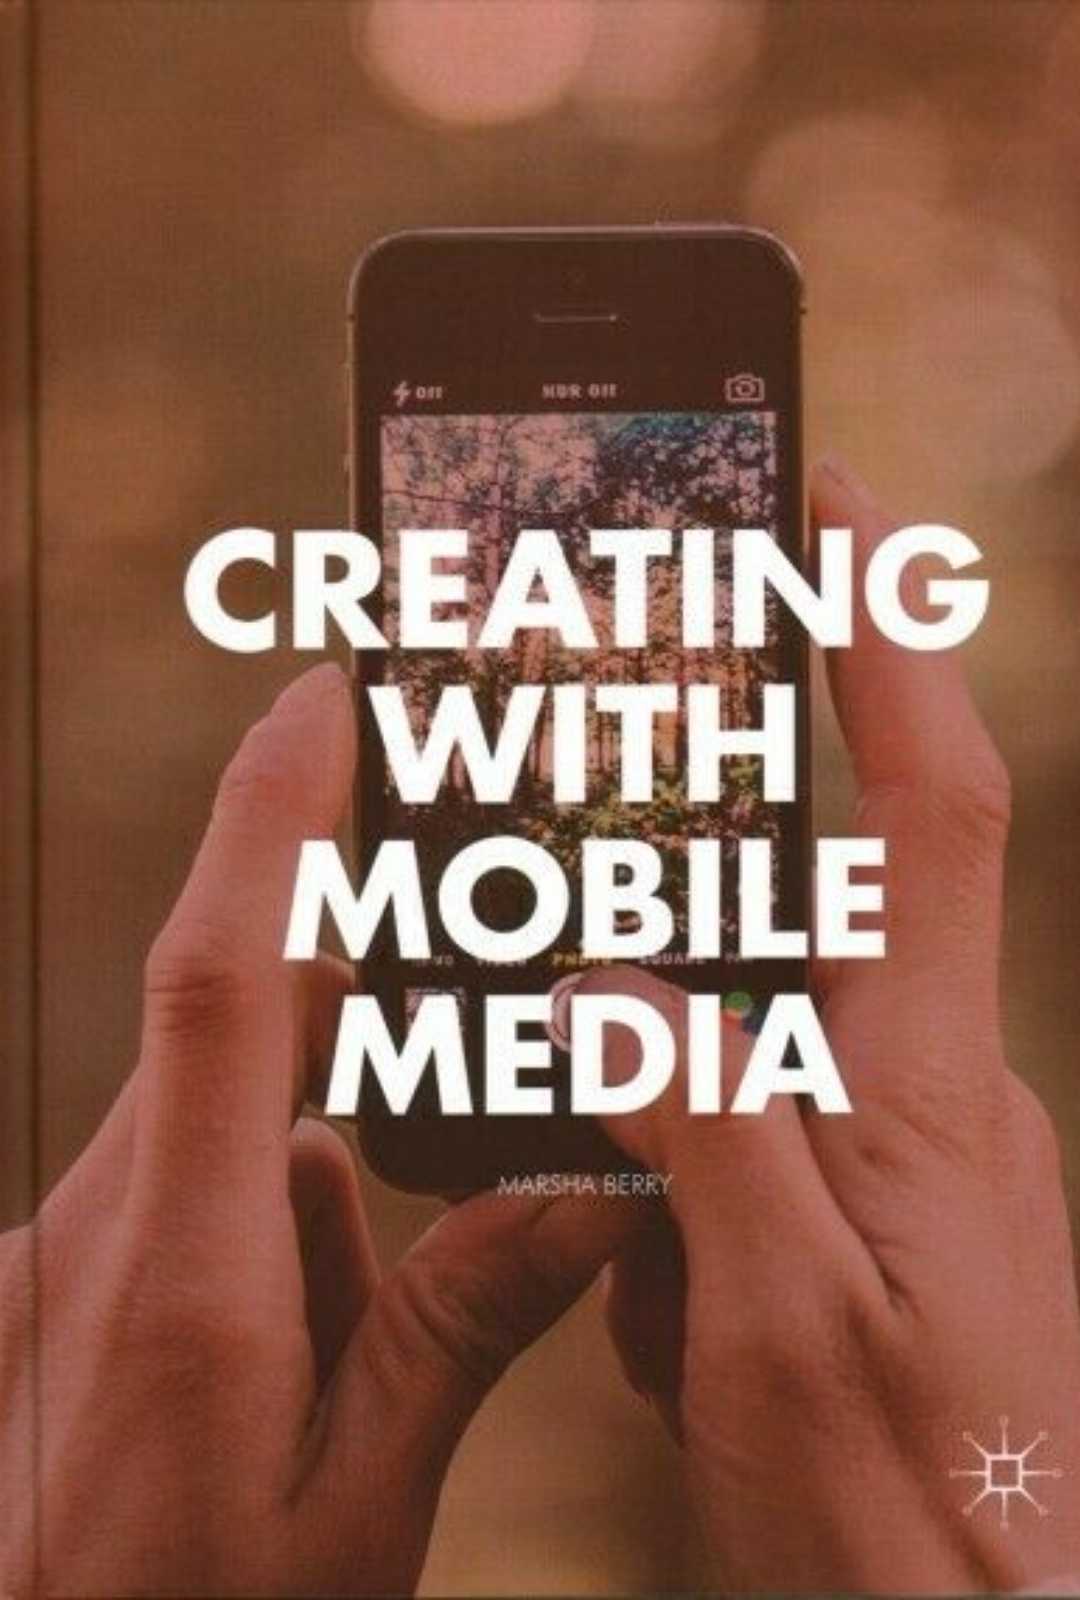 Creating with mobile media book cover